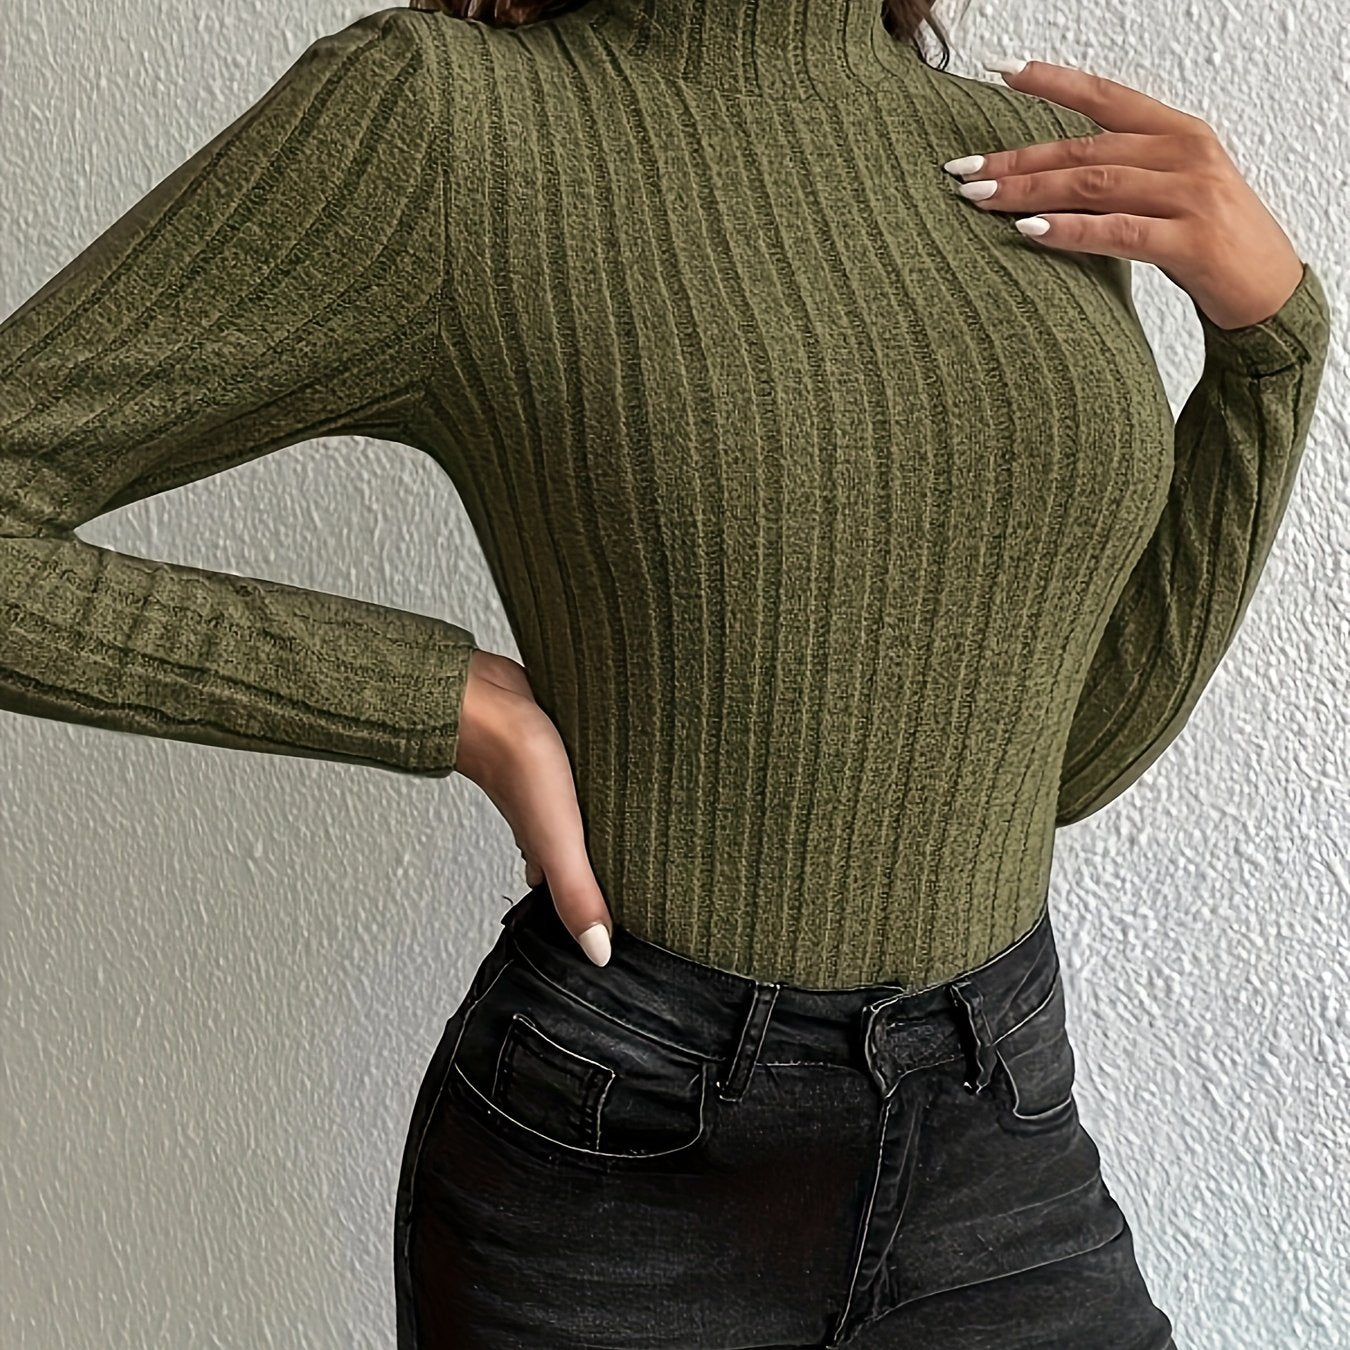 gbolsos  Solid Turtleneck Knit Top, Elegant Slim Long Sleeve Sweater For Spring & Fall, Women's Clothing